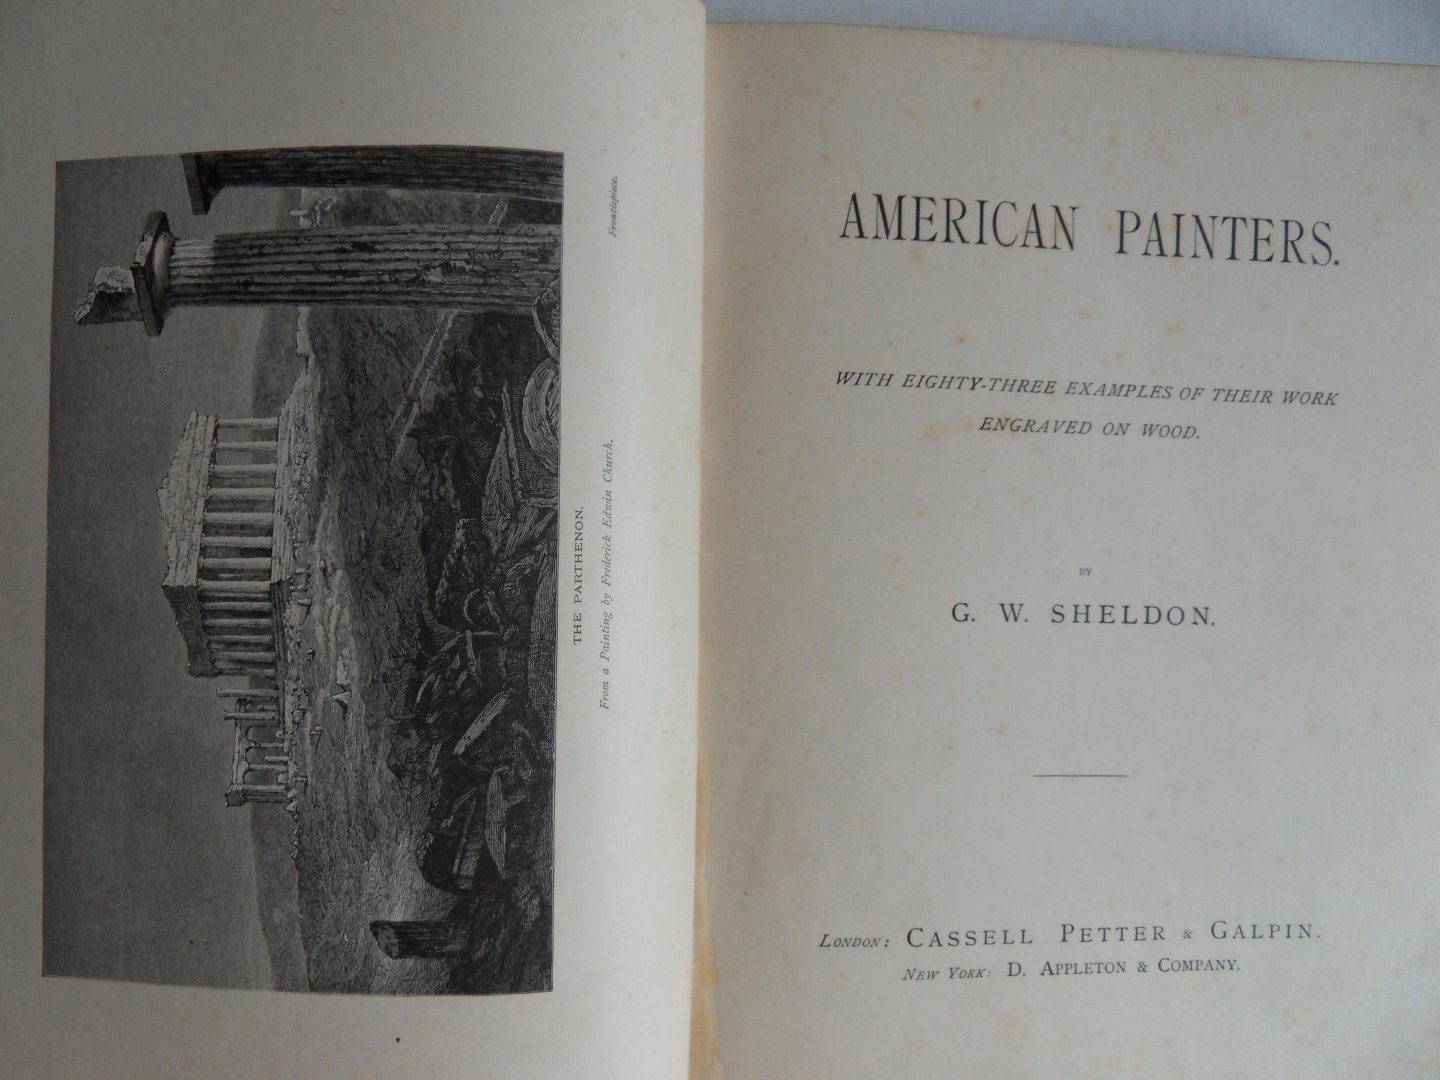 Sheldon, G.W. - American Painters. - With Eighty-Three Examples of their Work engraved on Wood.